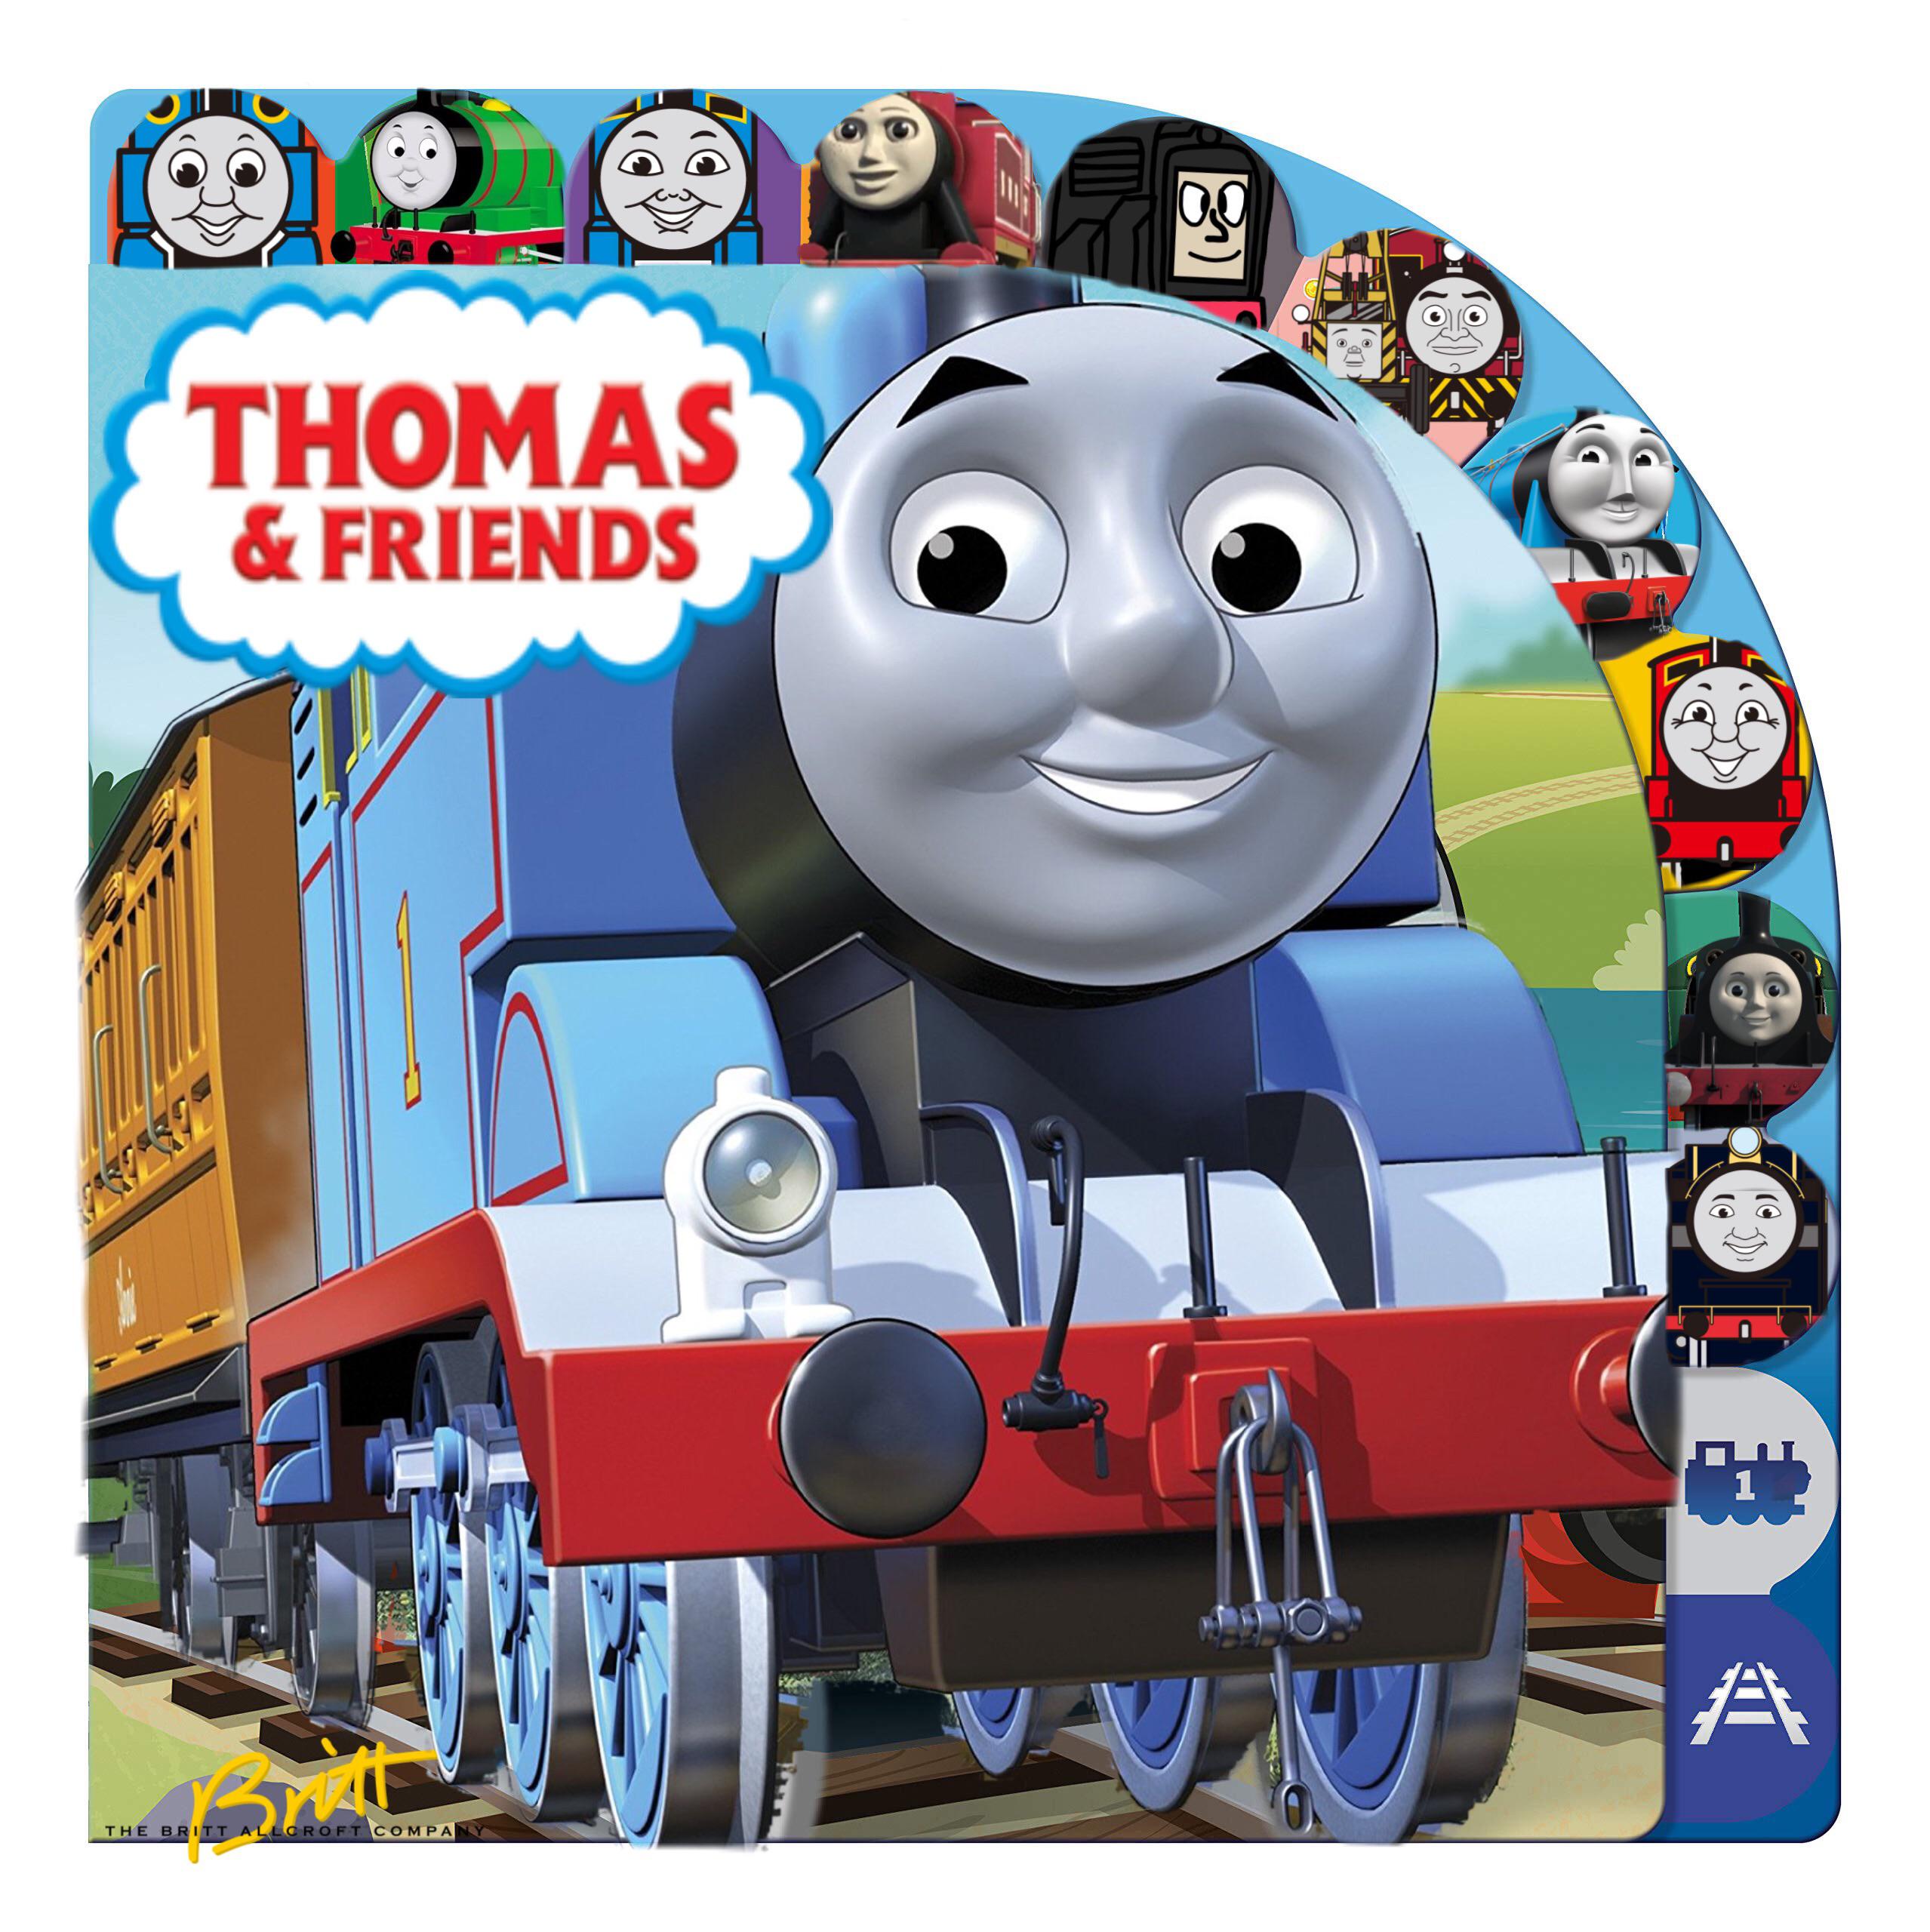 Fixed another Thomas and friends all engines go image